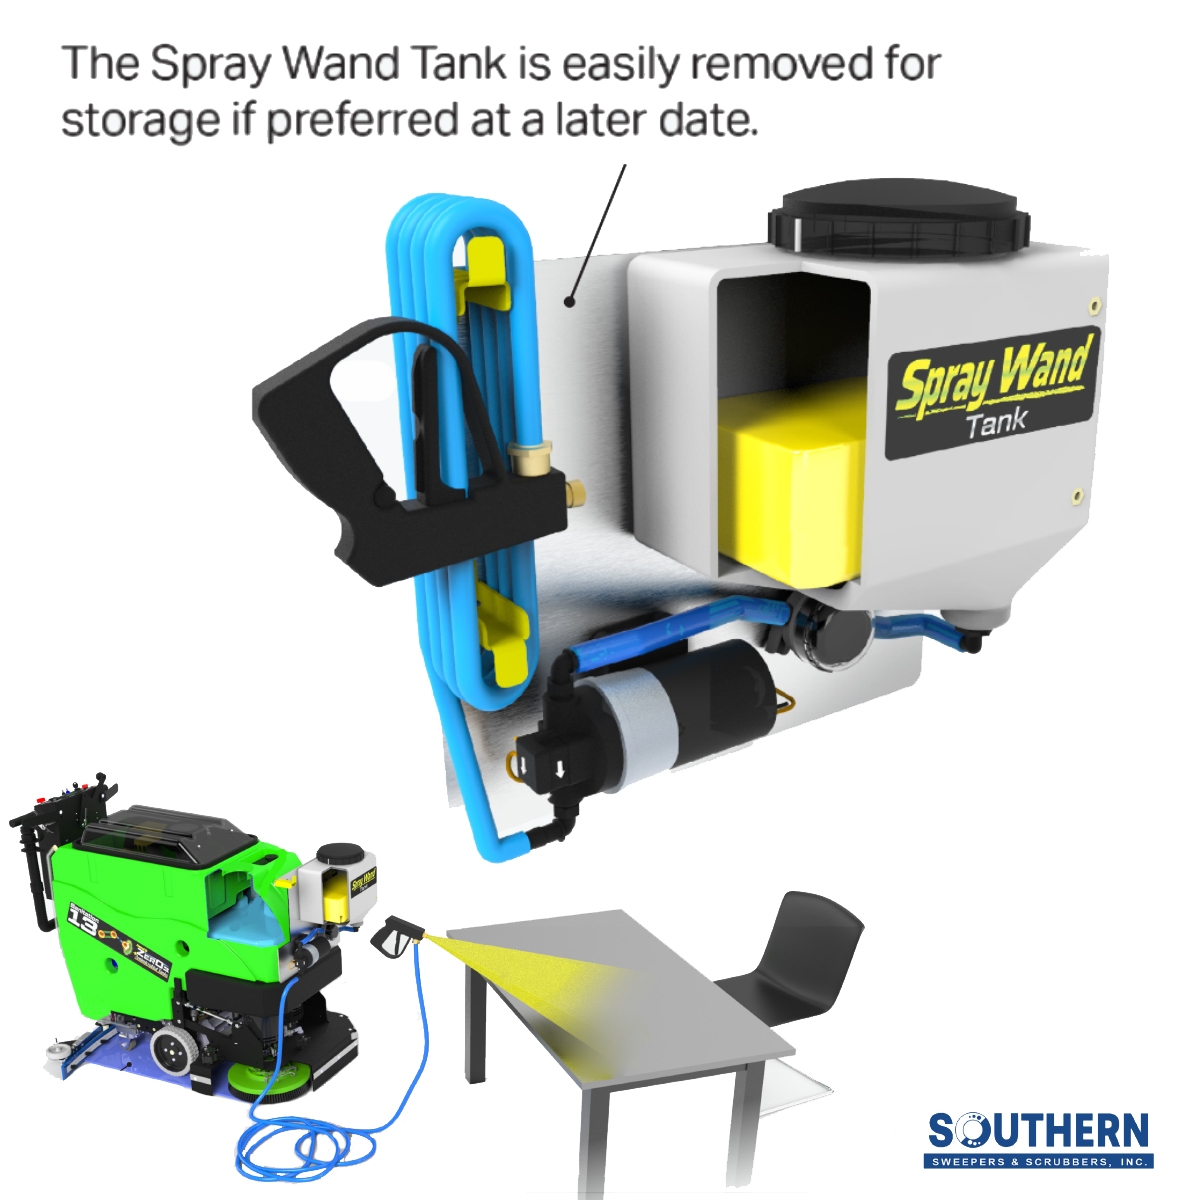 Sanitation Scrubber Spray Wand Tank allows for mass disinfectant treatment